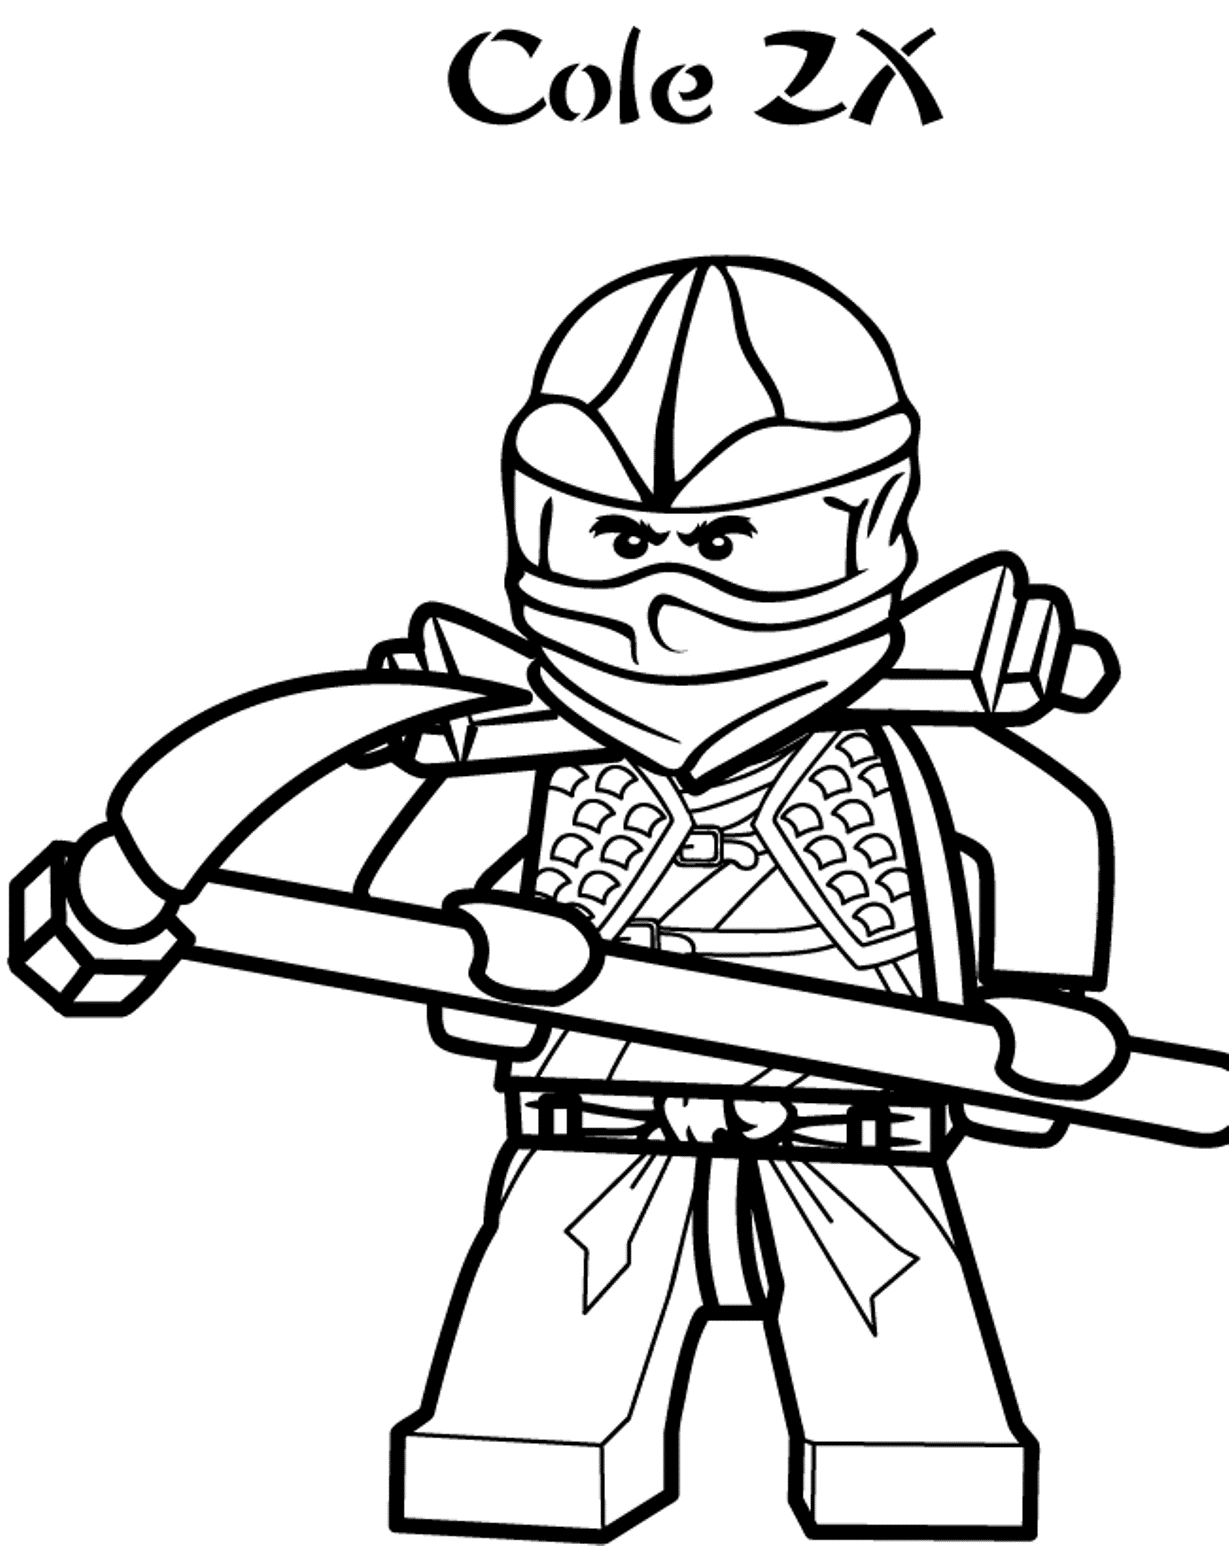 Cole Ninjago Coloring Pages   Cartoon Coloring Pages Of ...